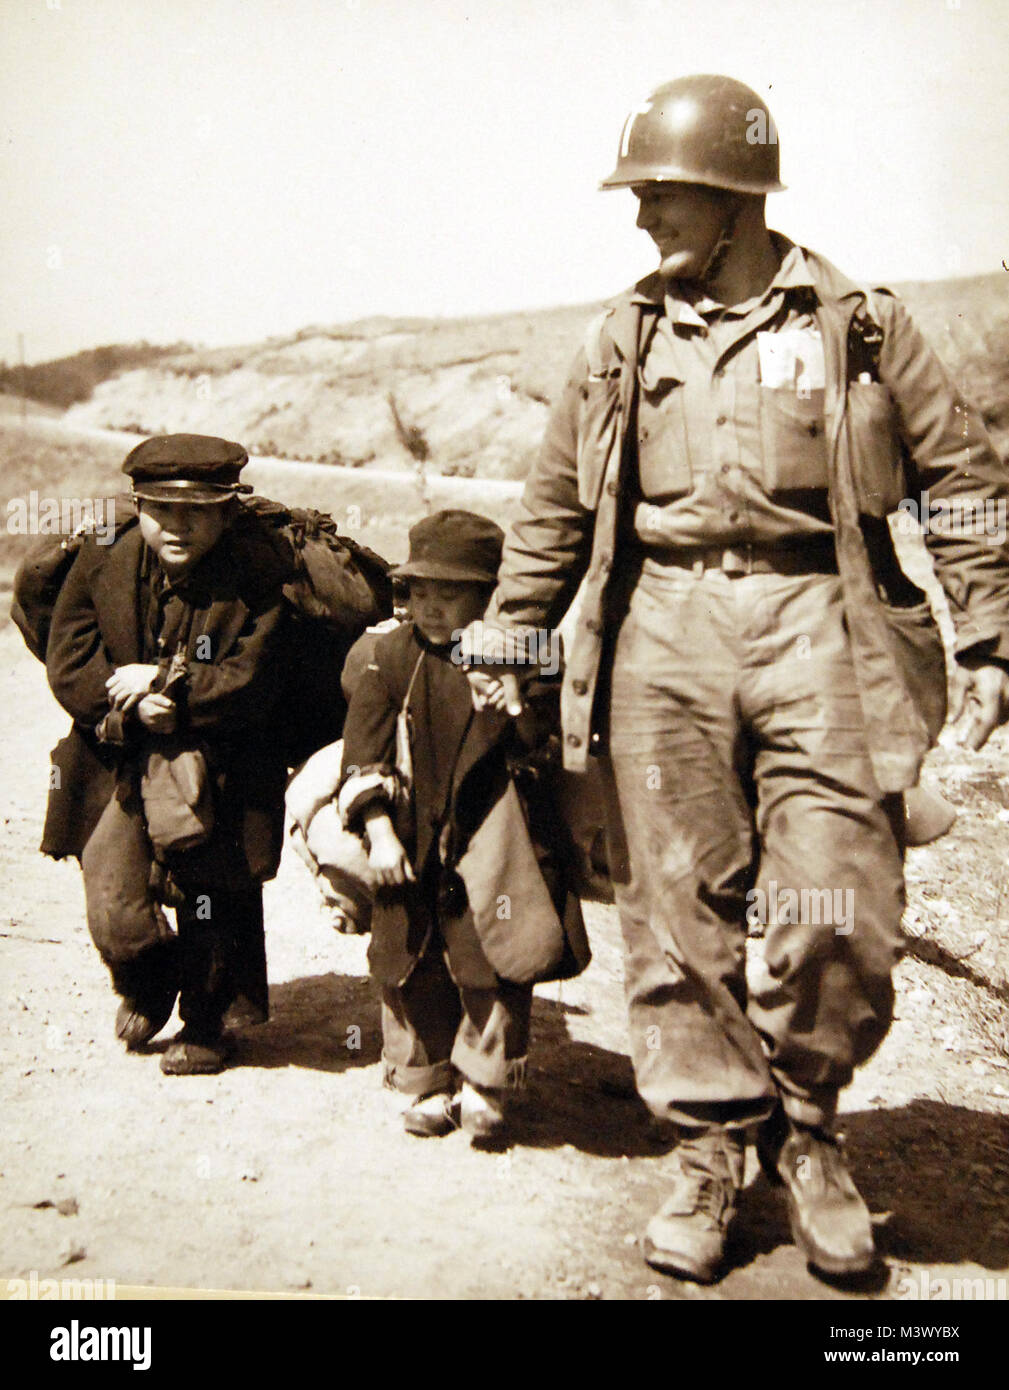 80-G-427969:  Korean War, 1950-1953.   Navy Chaplain Lieutenant Junior Grade R.L. Patton, (ChC), USN, of Tulsa, Oklahoma, serving with First Marine Division leads two small boys back to their liberated homes at Hongchon, Korea.  Photographed March 20, 1951.  Official U.S. Navy Photograph, now in the collections of the National Archives.  (2018/01/10). 80-G-427969 24749398297 o Stock Photo